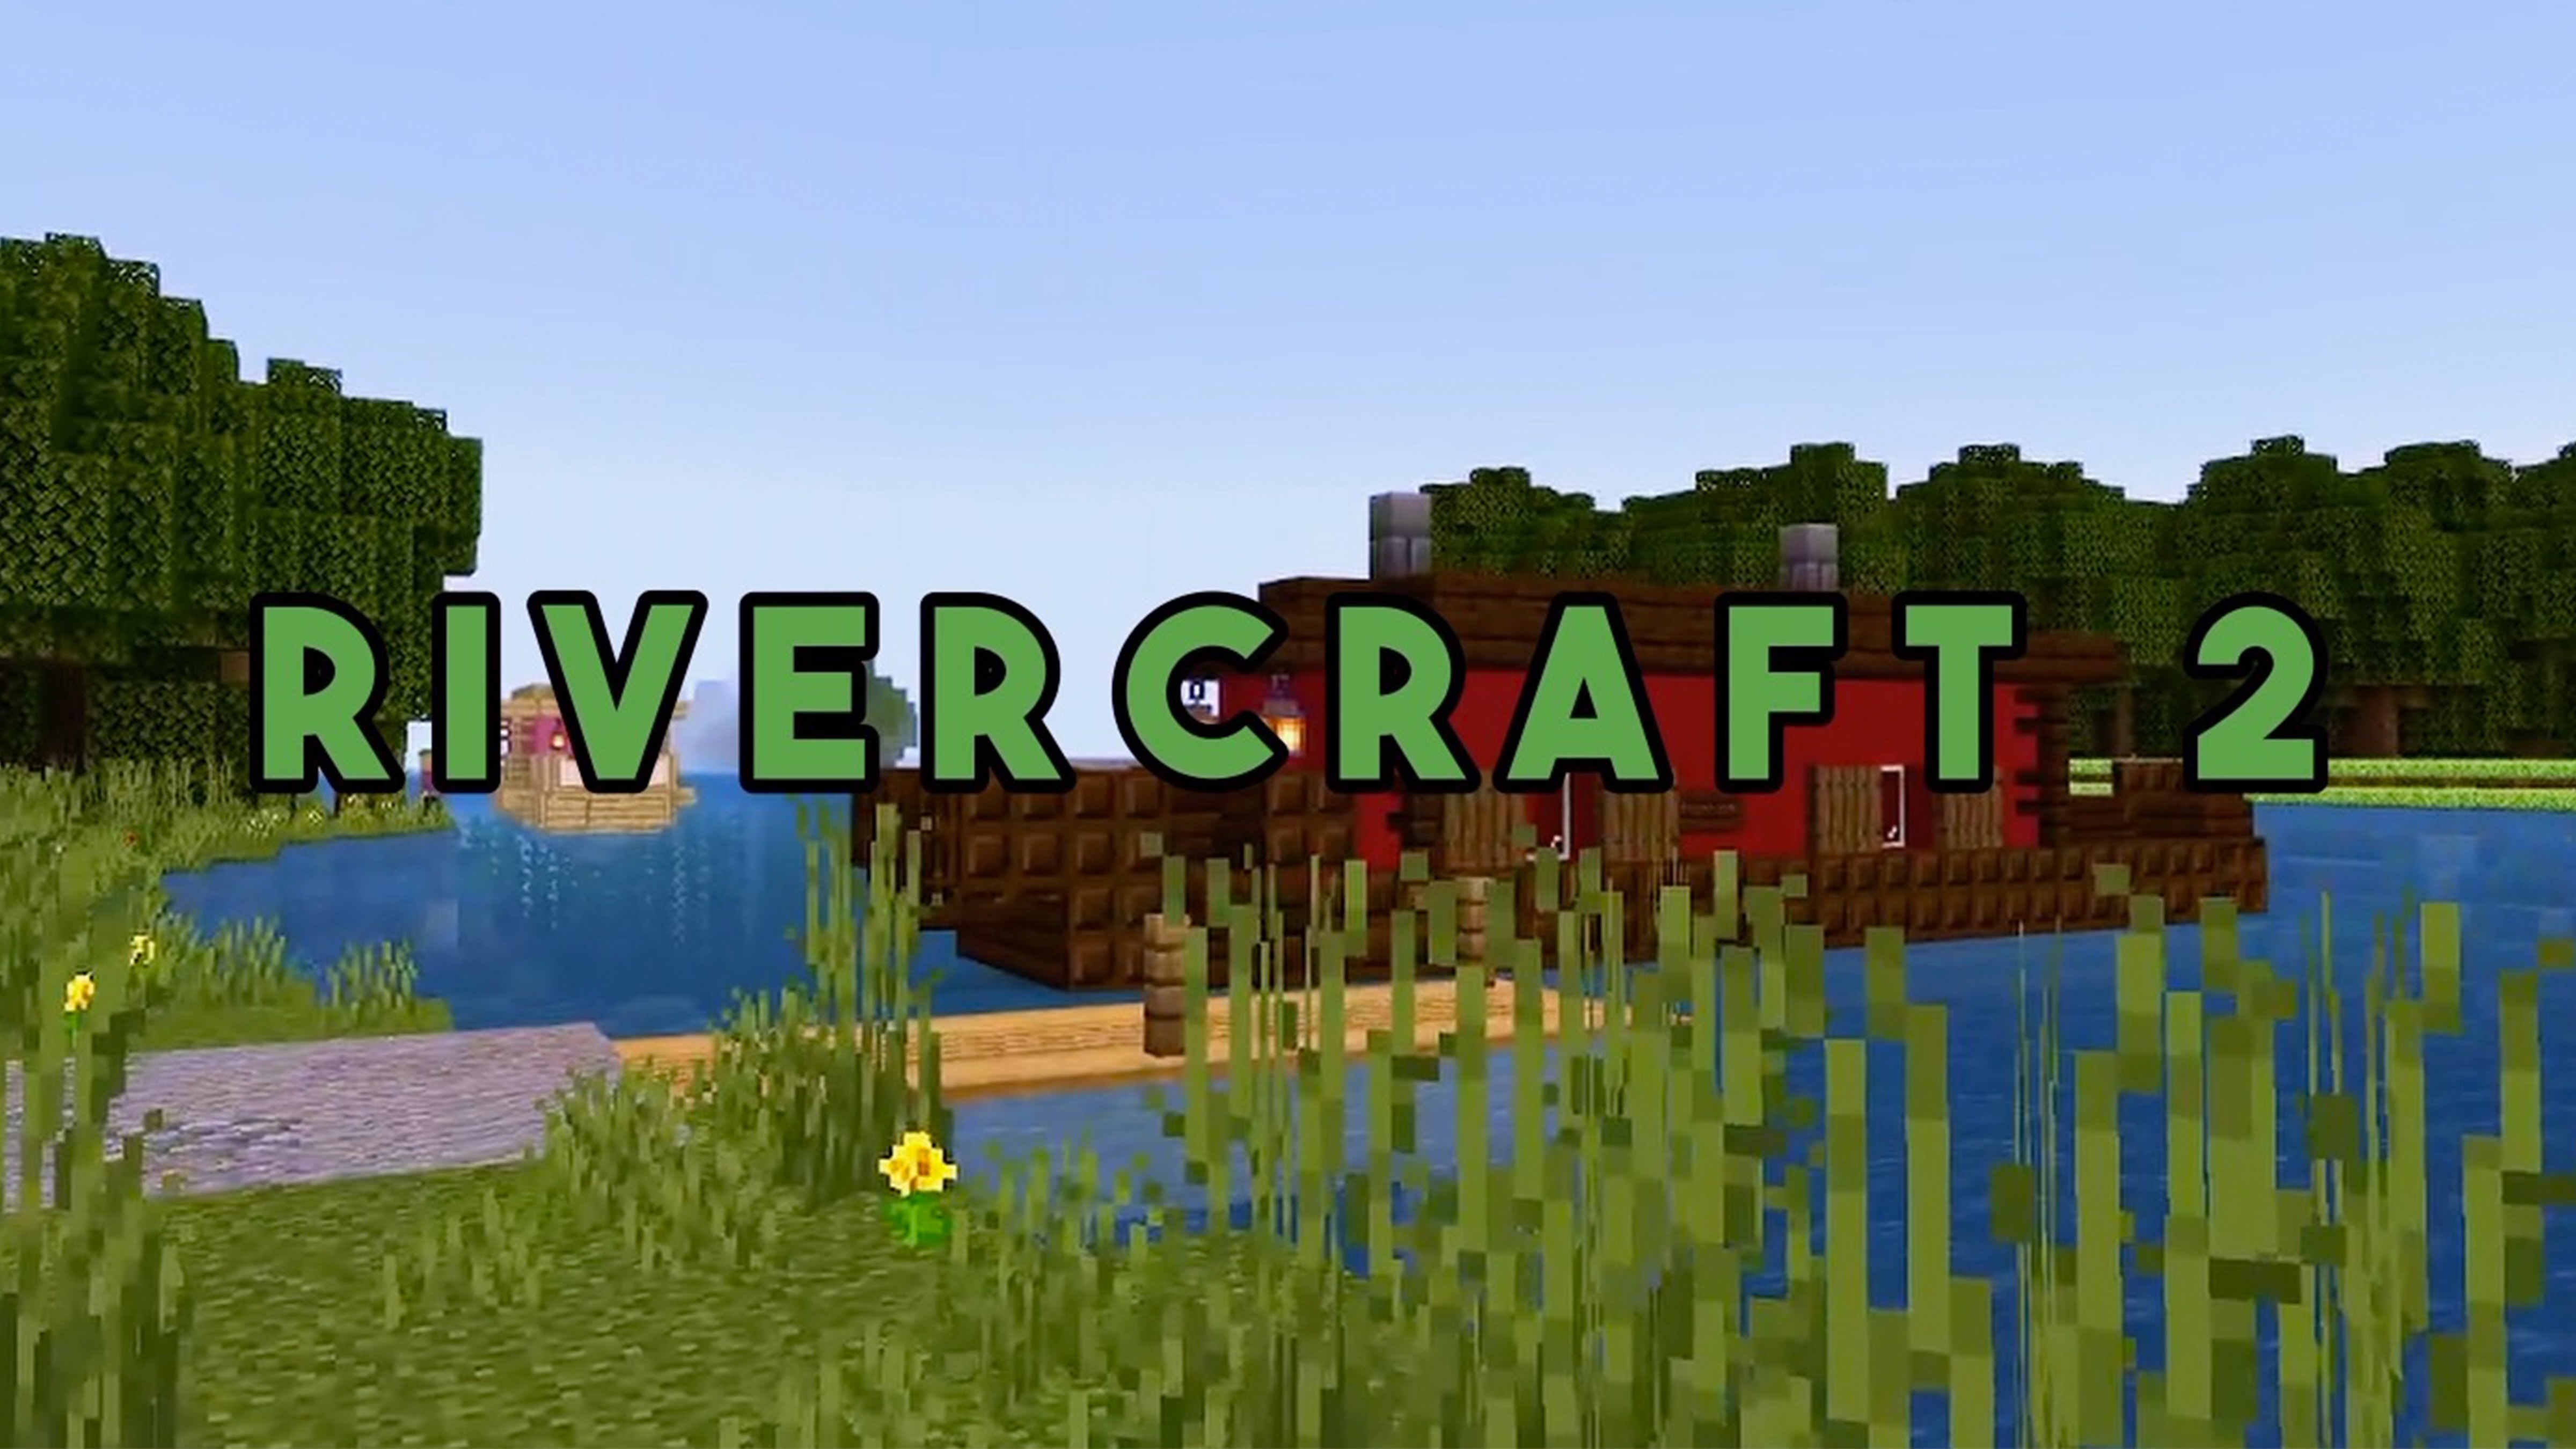 You Can Finally Dig Into Minecraft: Education Edition On Chromebooks